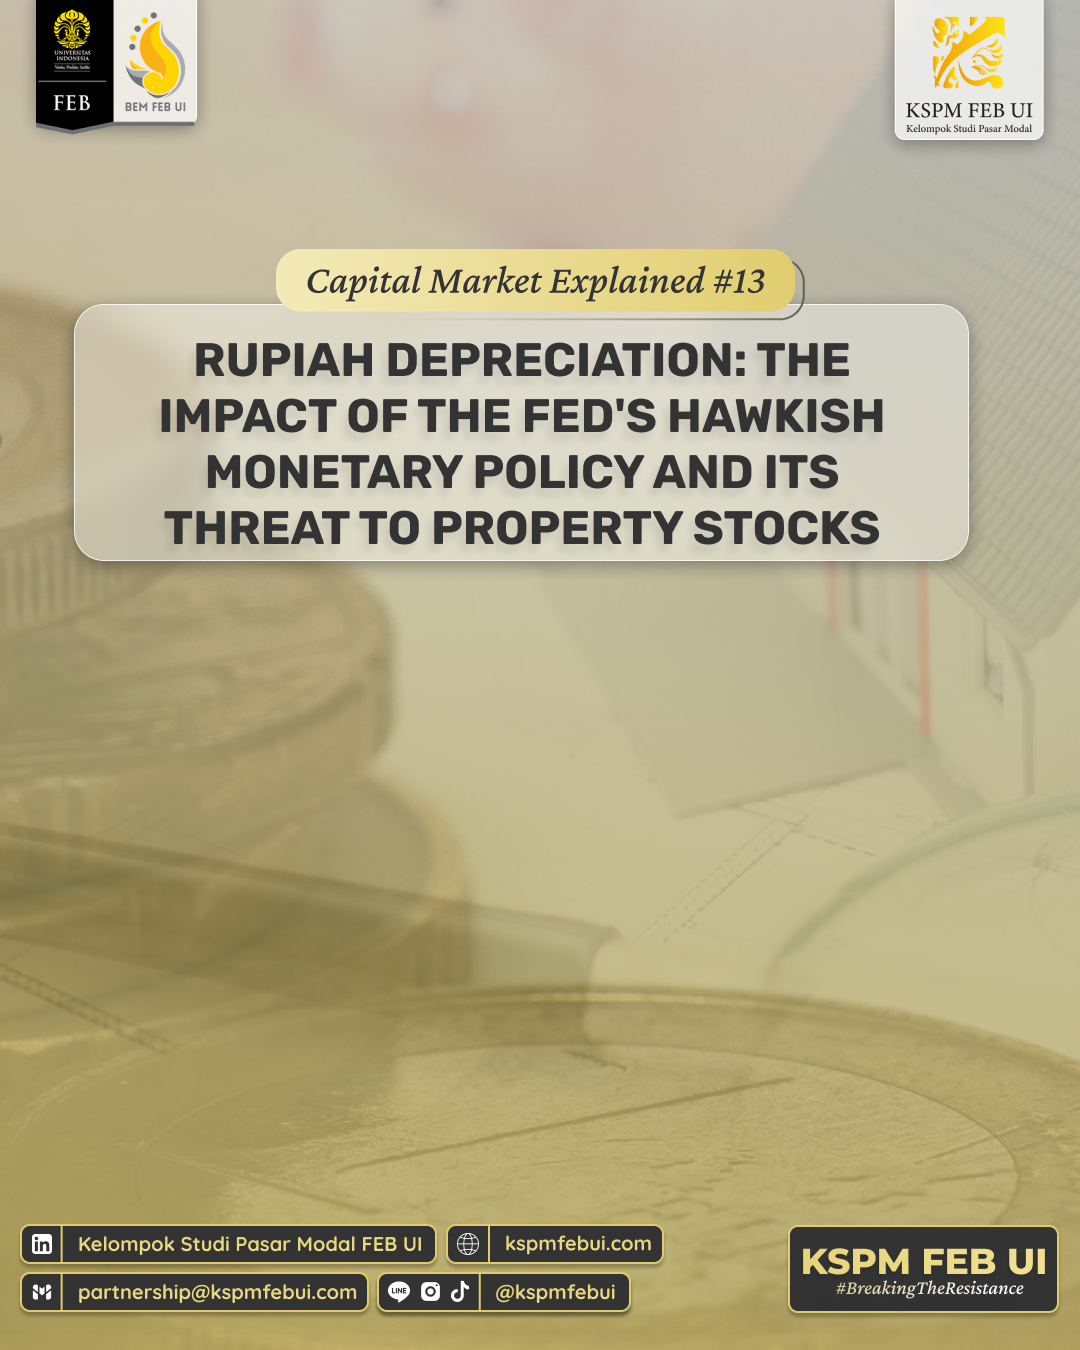 CME #13: “Rupiah Depreciation: The Impact of TheFed’s Hawkish Monetary Policy and Its Threat to Property Stocks”